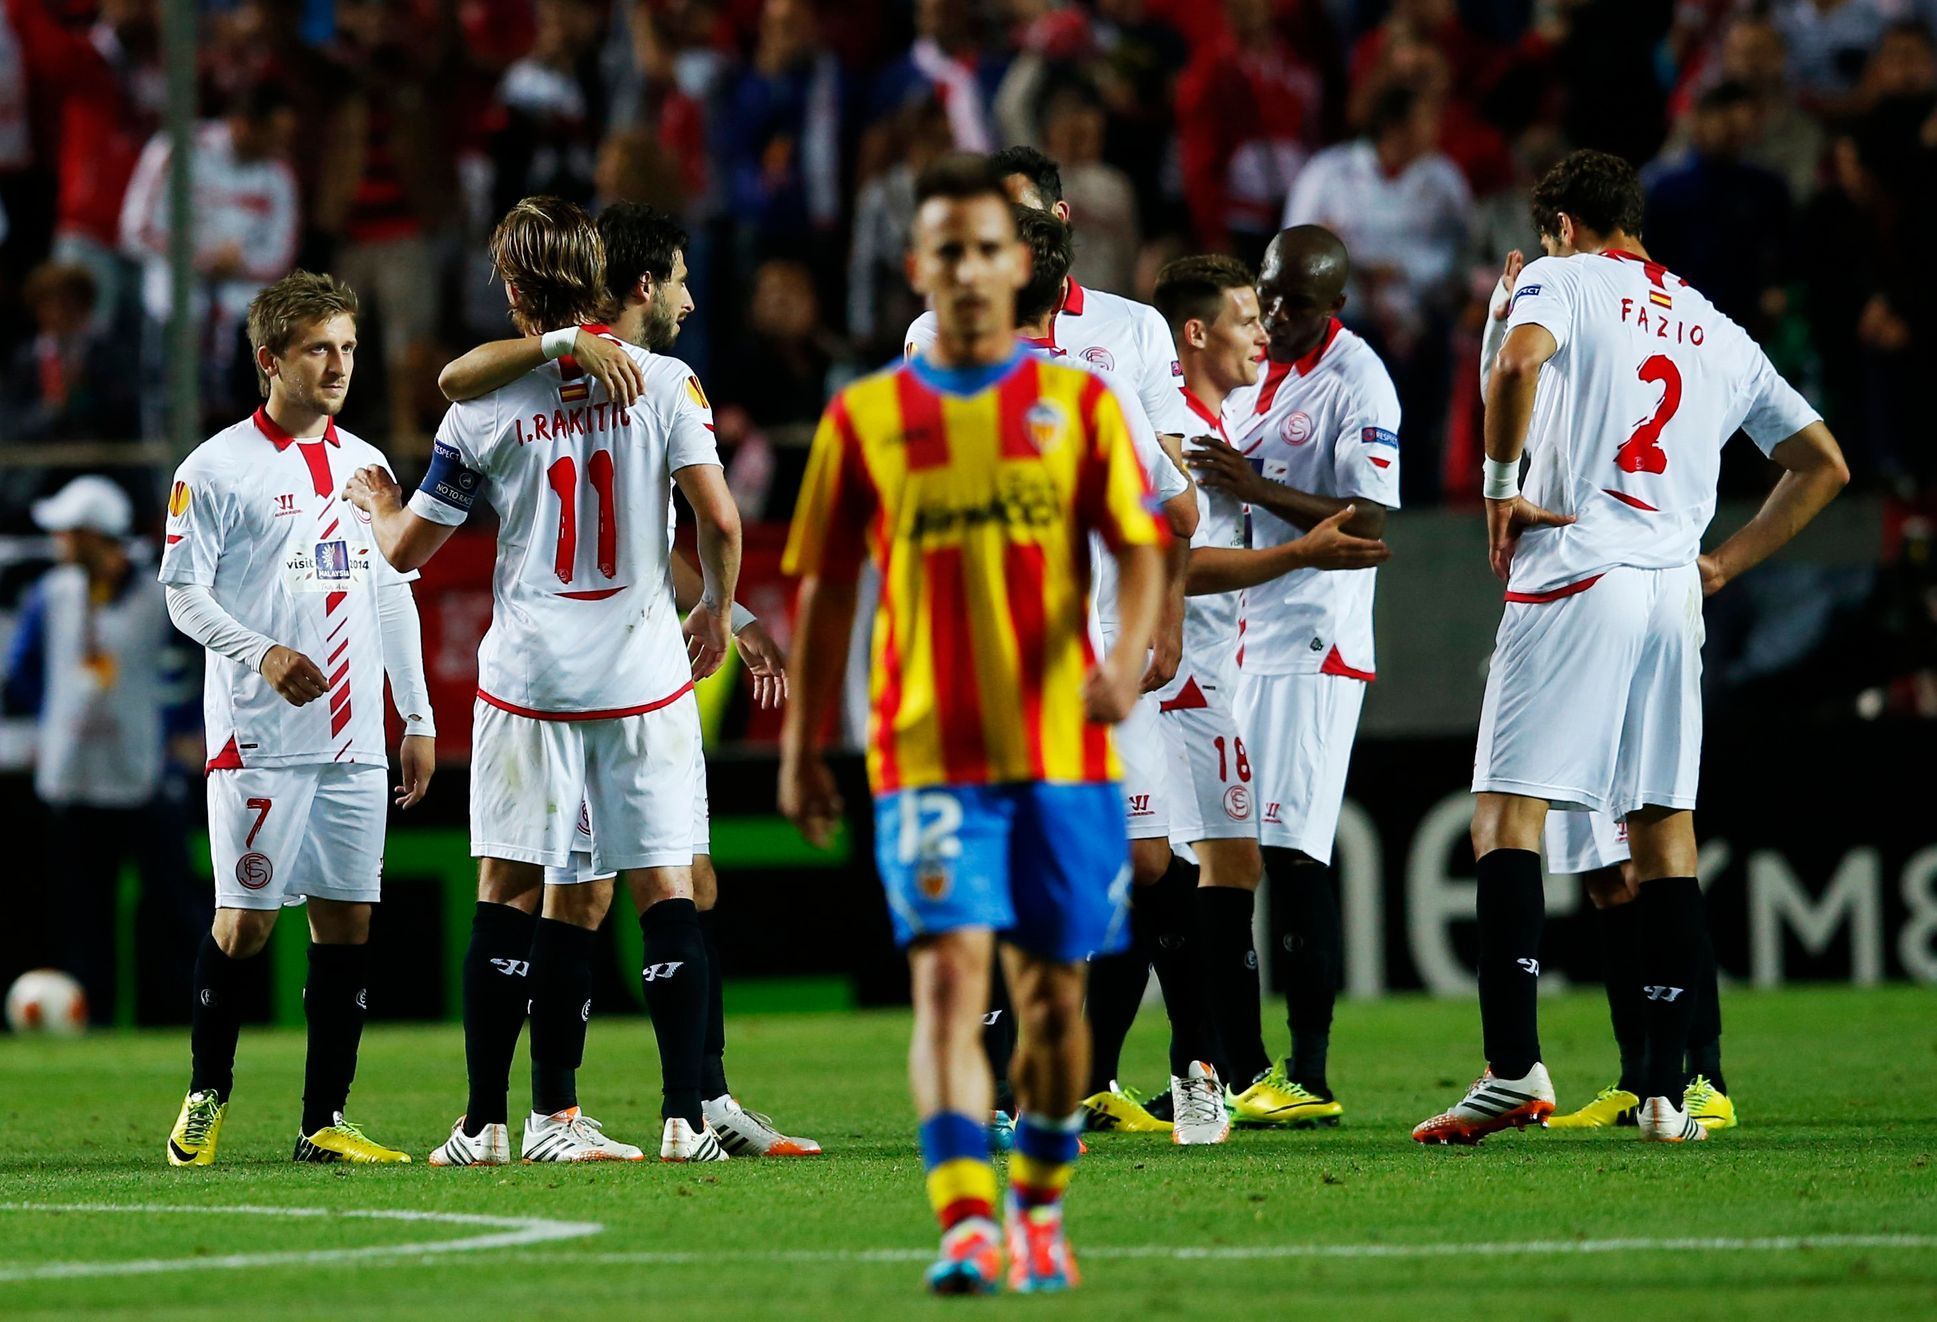 Sevilla's players celebrate winning after the end of their soccer match against Valencia in Seville